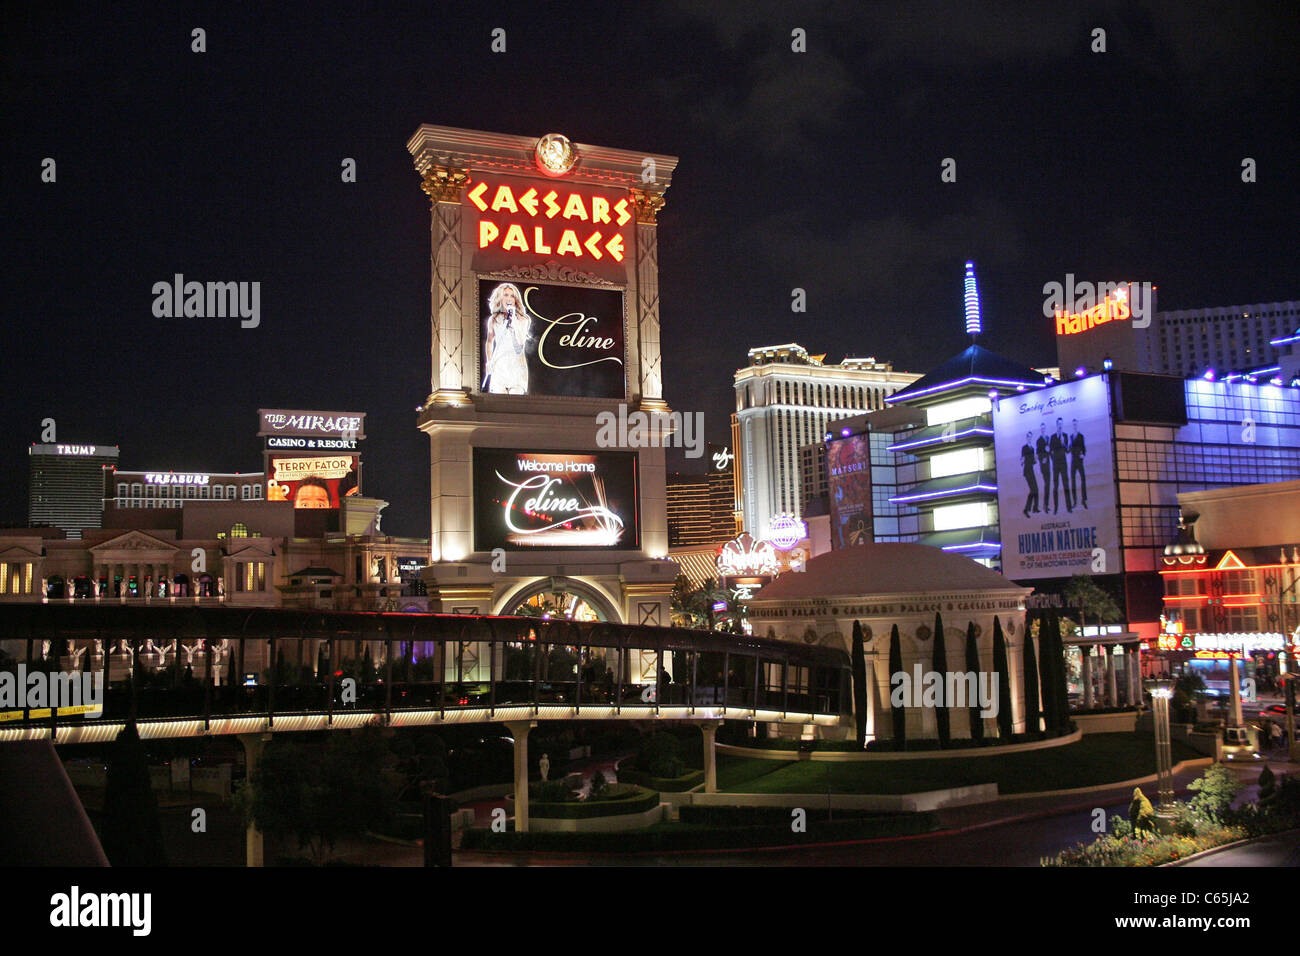 A general view of the Colosseum entrance at Caesars Palace on February 3,  2016 in Las Vegas, Nevada, USA. Photo by Denise Truscello/Caesars Palace  via ABACAPRESS.COM Stock Photo - Alamy